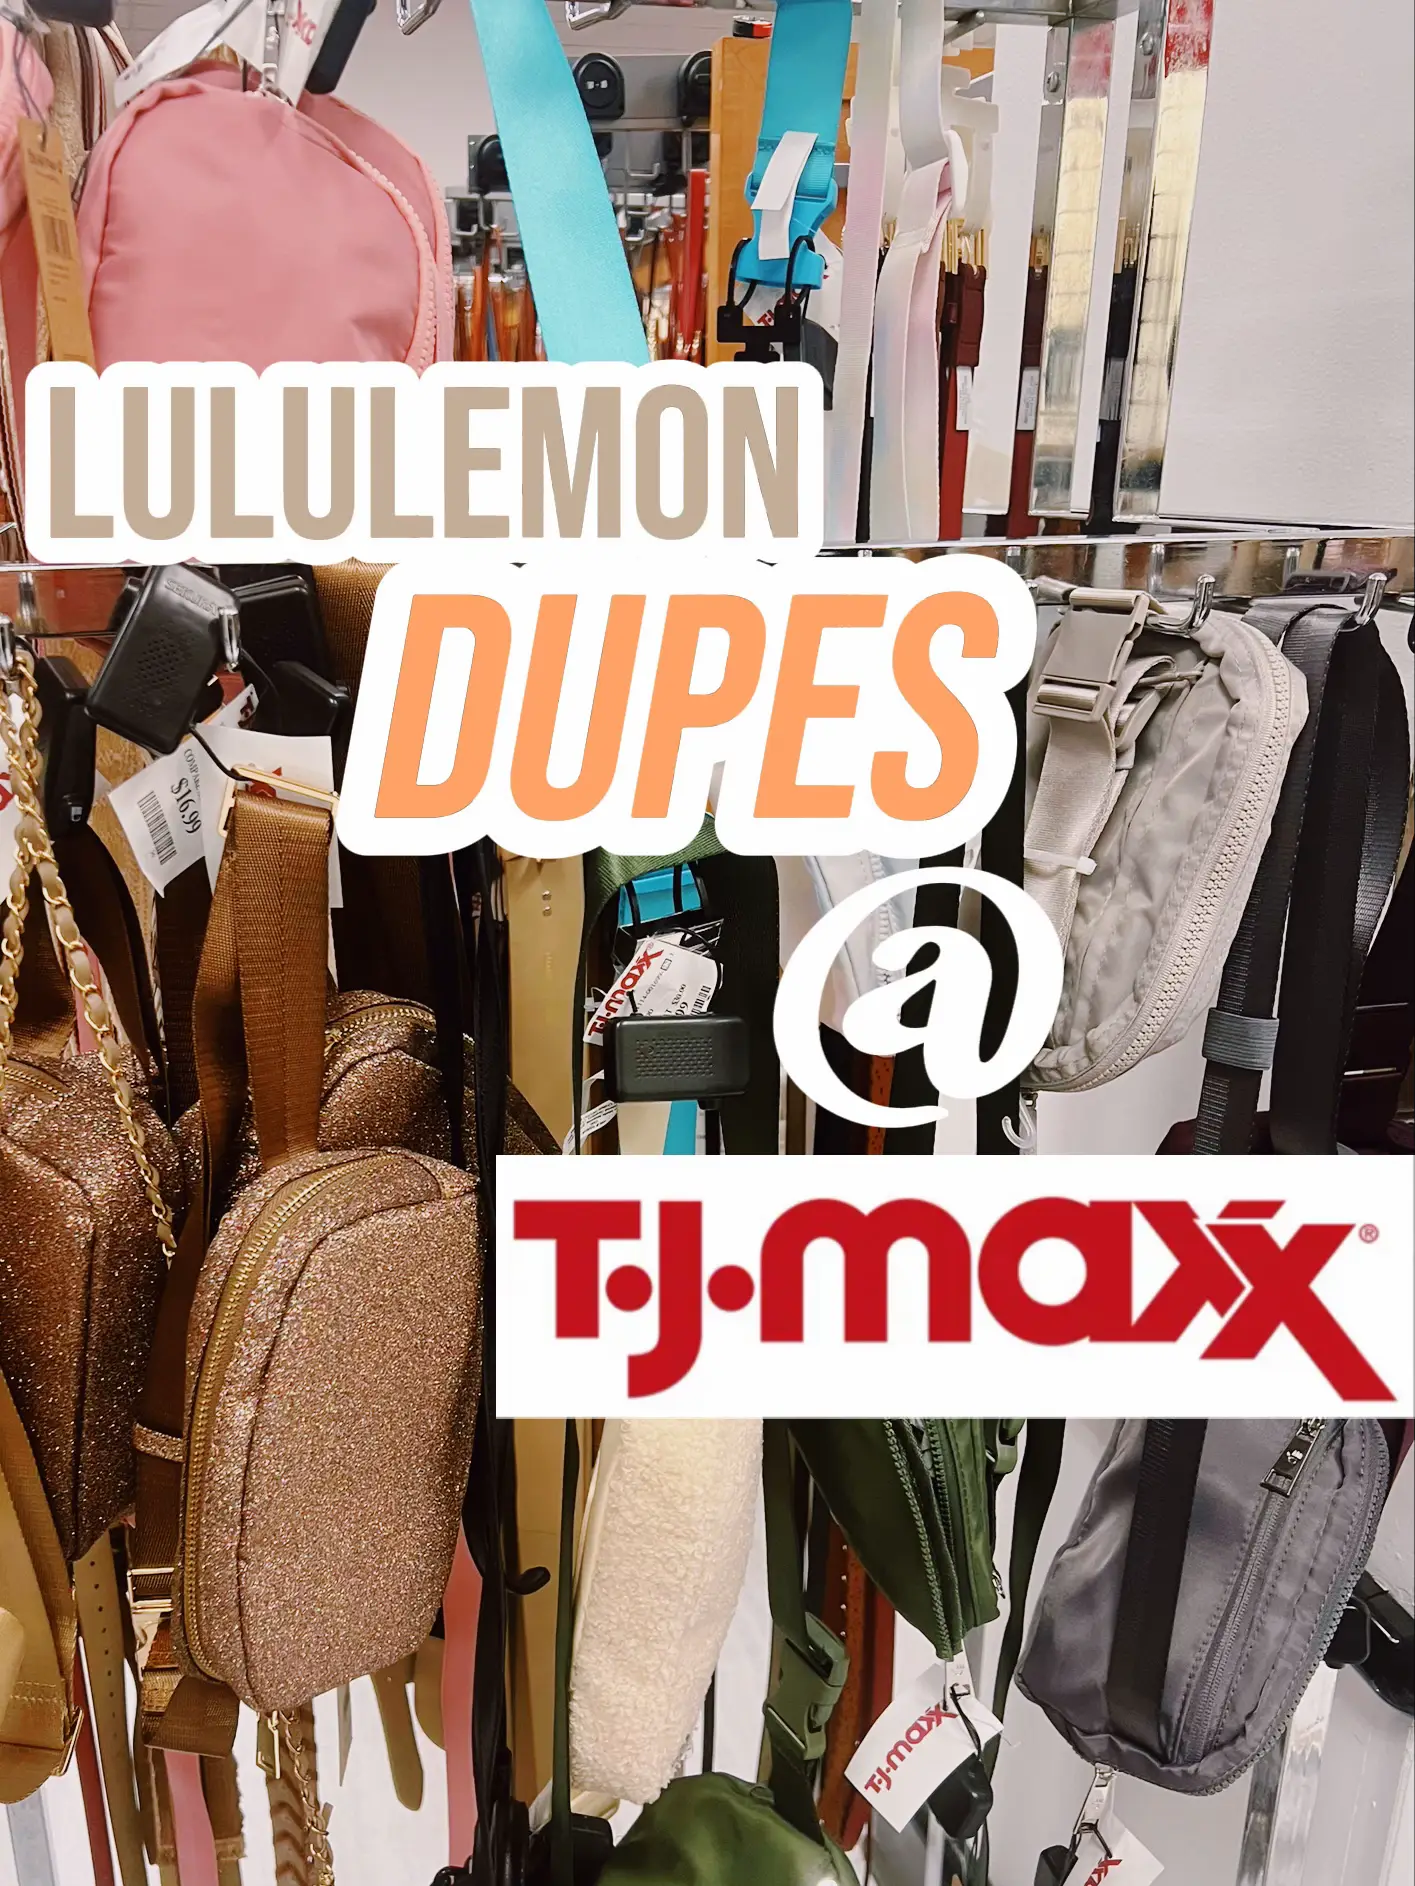 Lululemon Dupes at Tj Maxx for less!